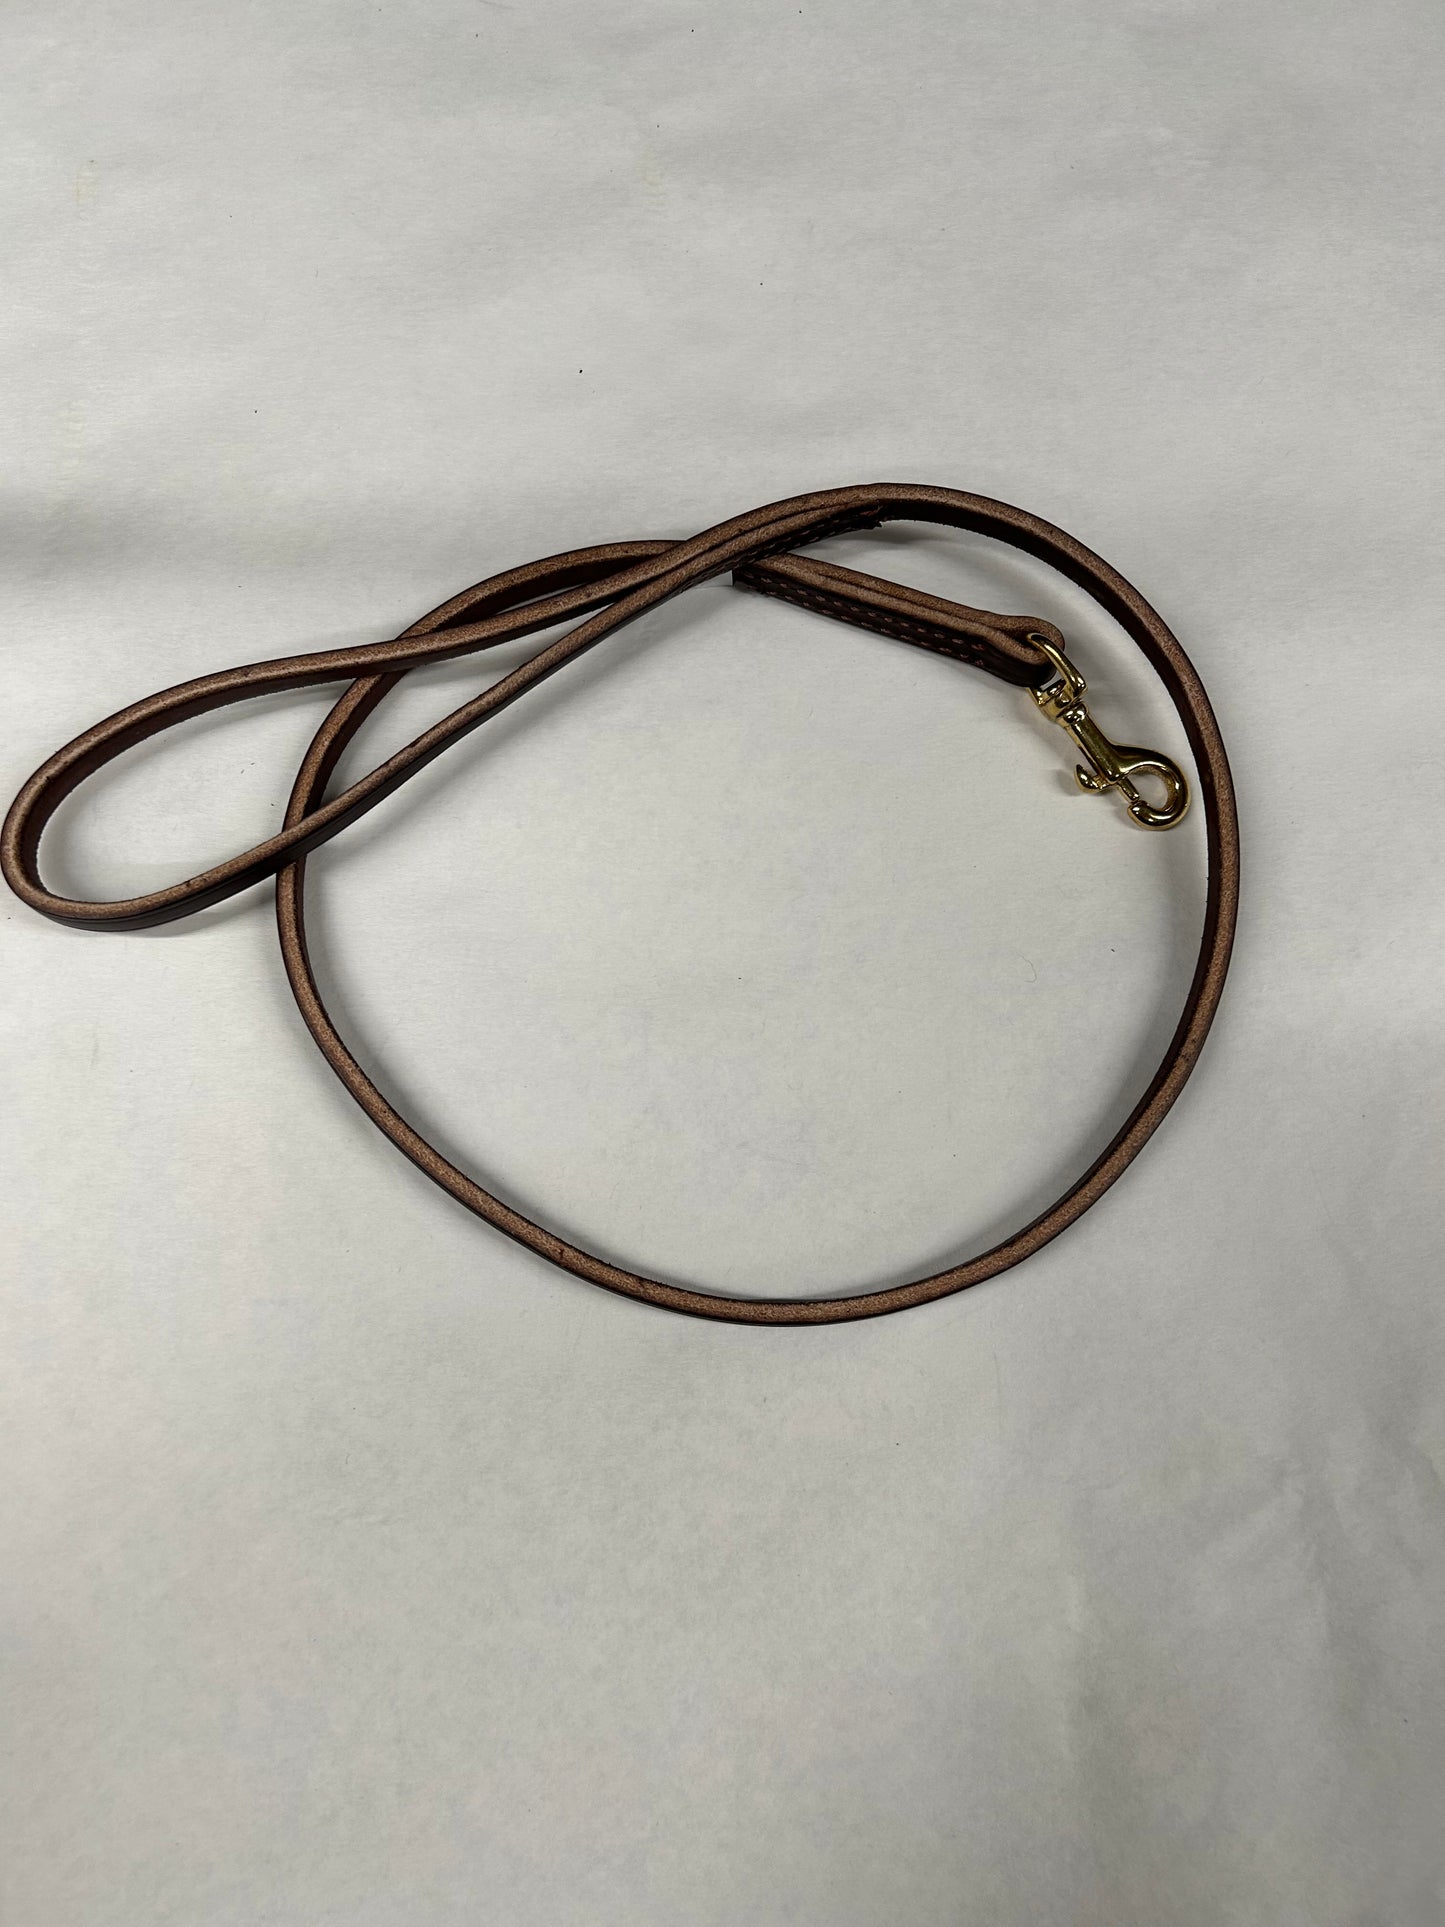 3ft x 3/8in leather leash (brown)